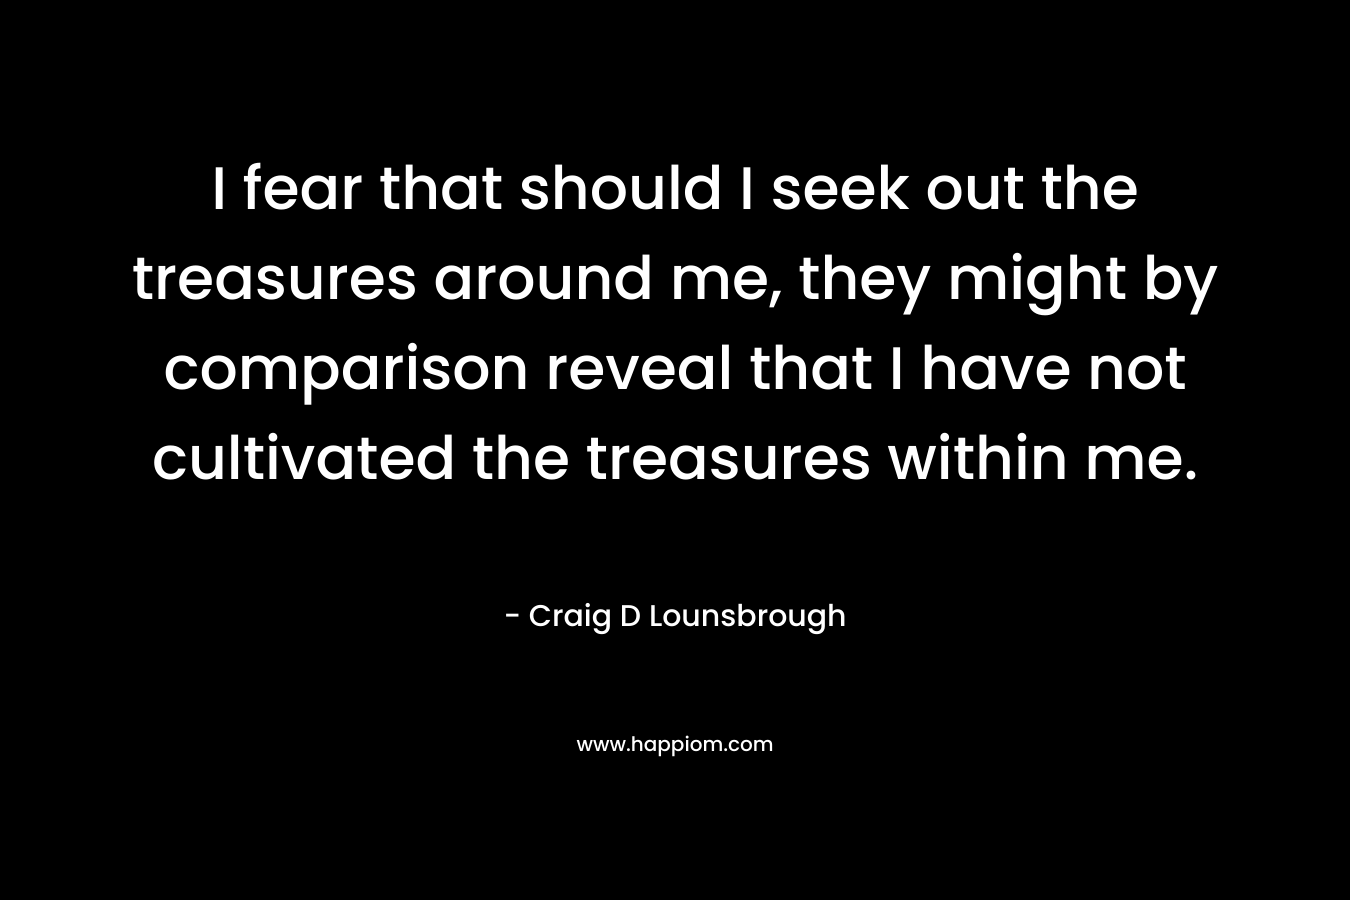 I fear that should I seek out the treasures around me, they might by comparison reveal that I have not cultivated the treasures within me.